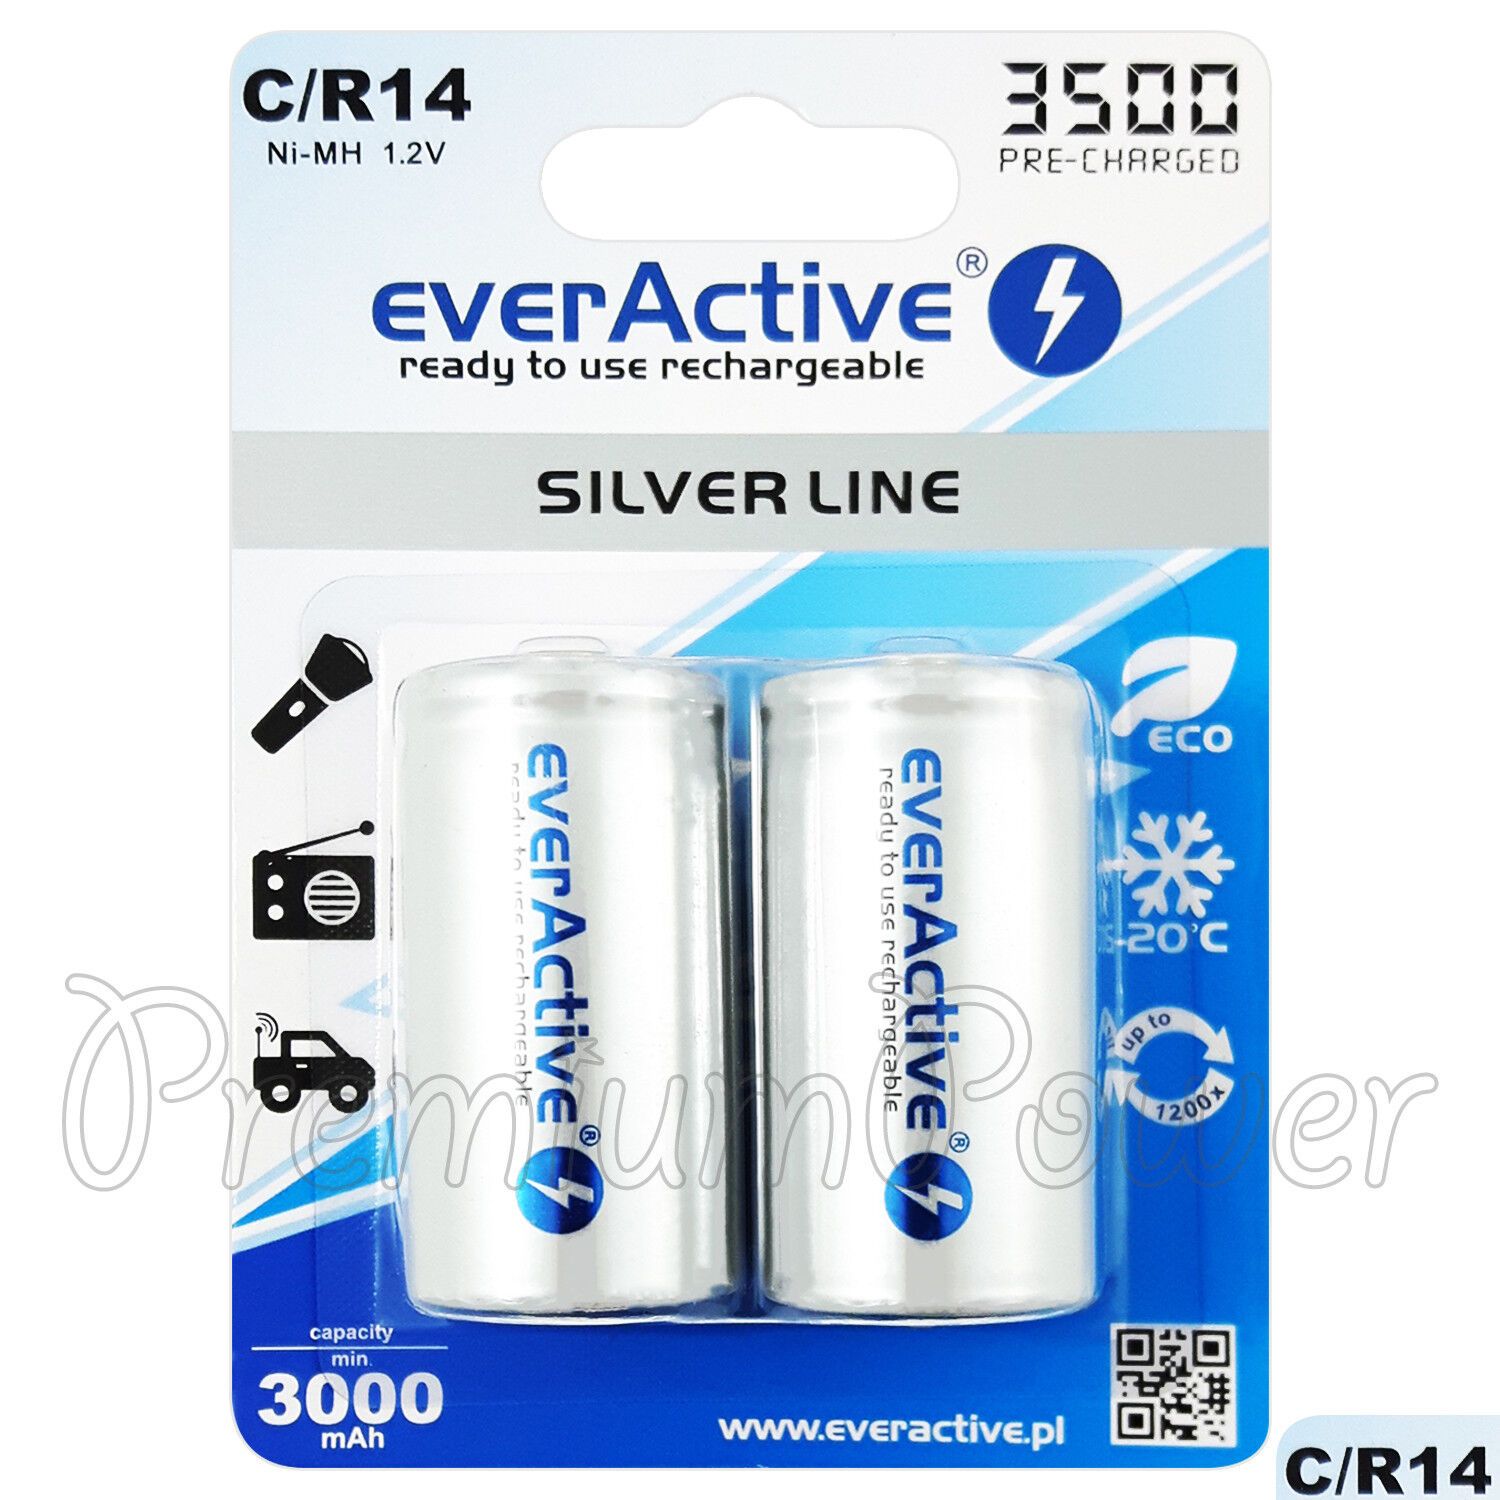 Rechargeable Batteries everActive R14/C Ni-MH 3500 mAh ready to use_1